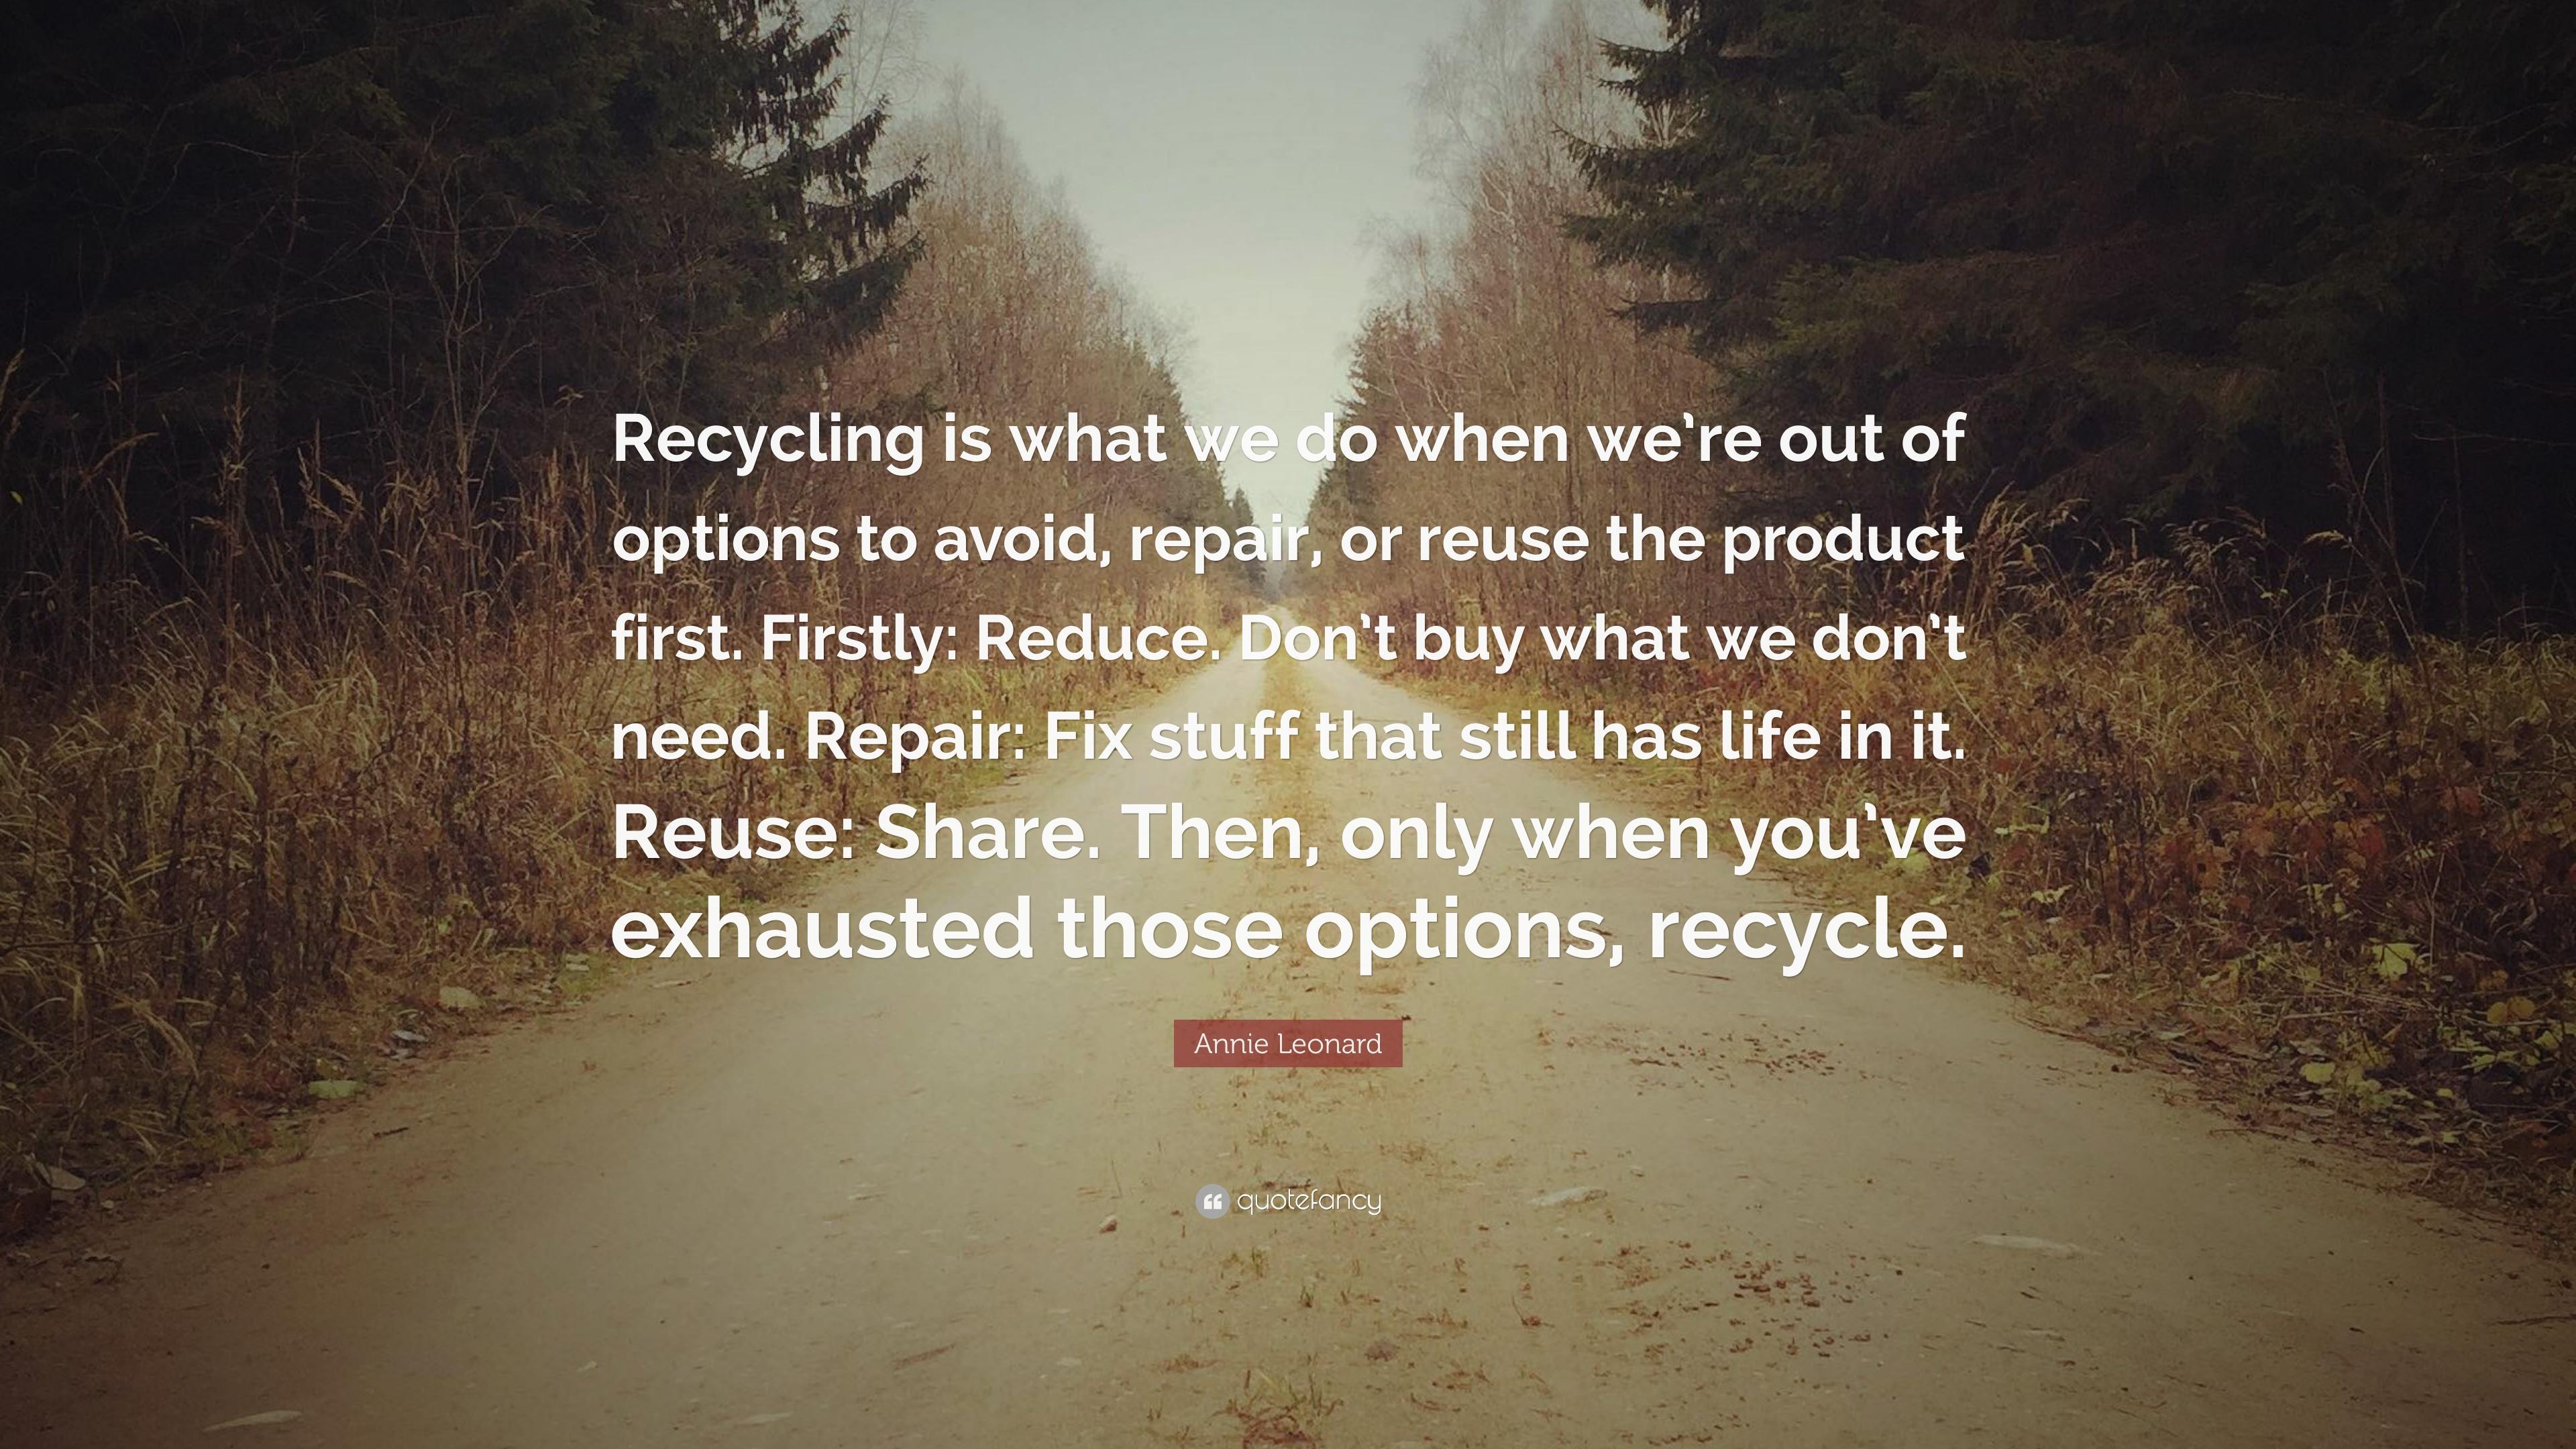 Annie Leonard Quote: “Recycling is what we do when we're out